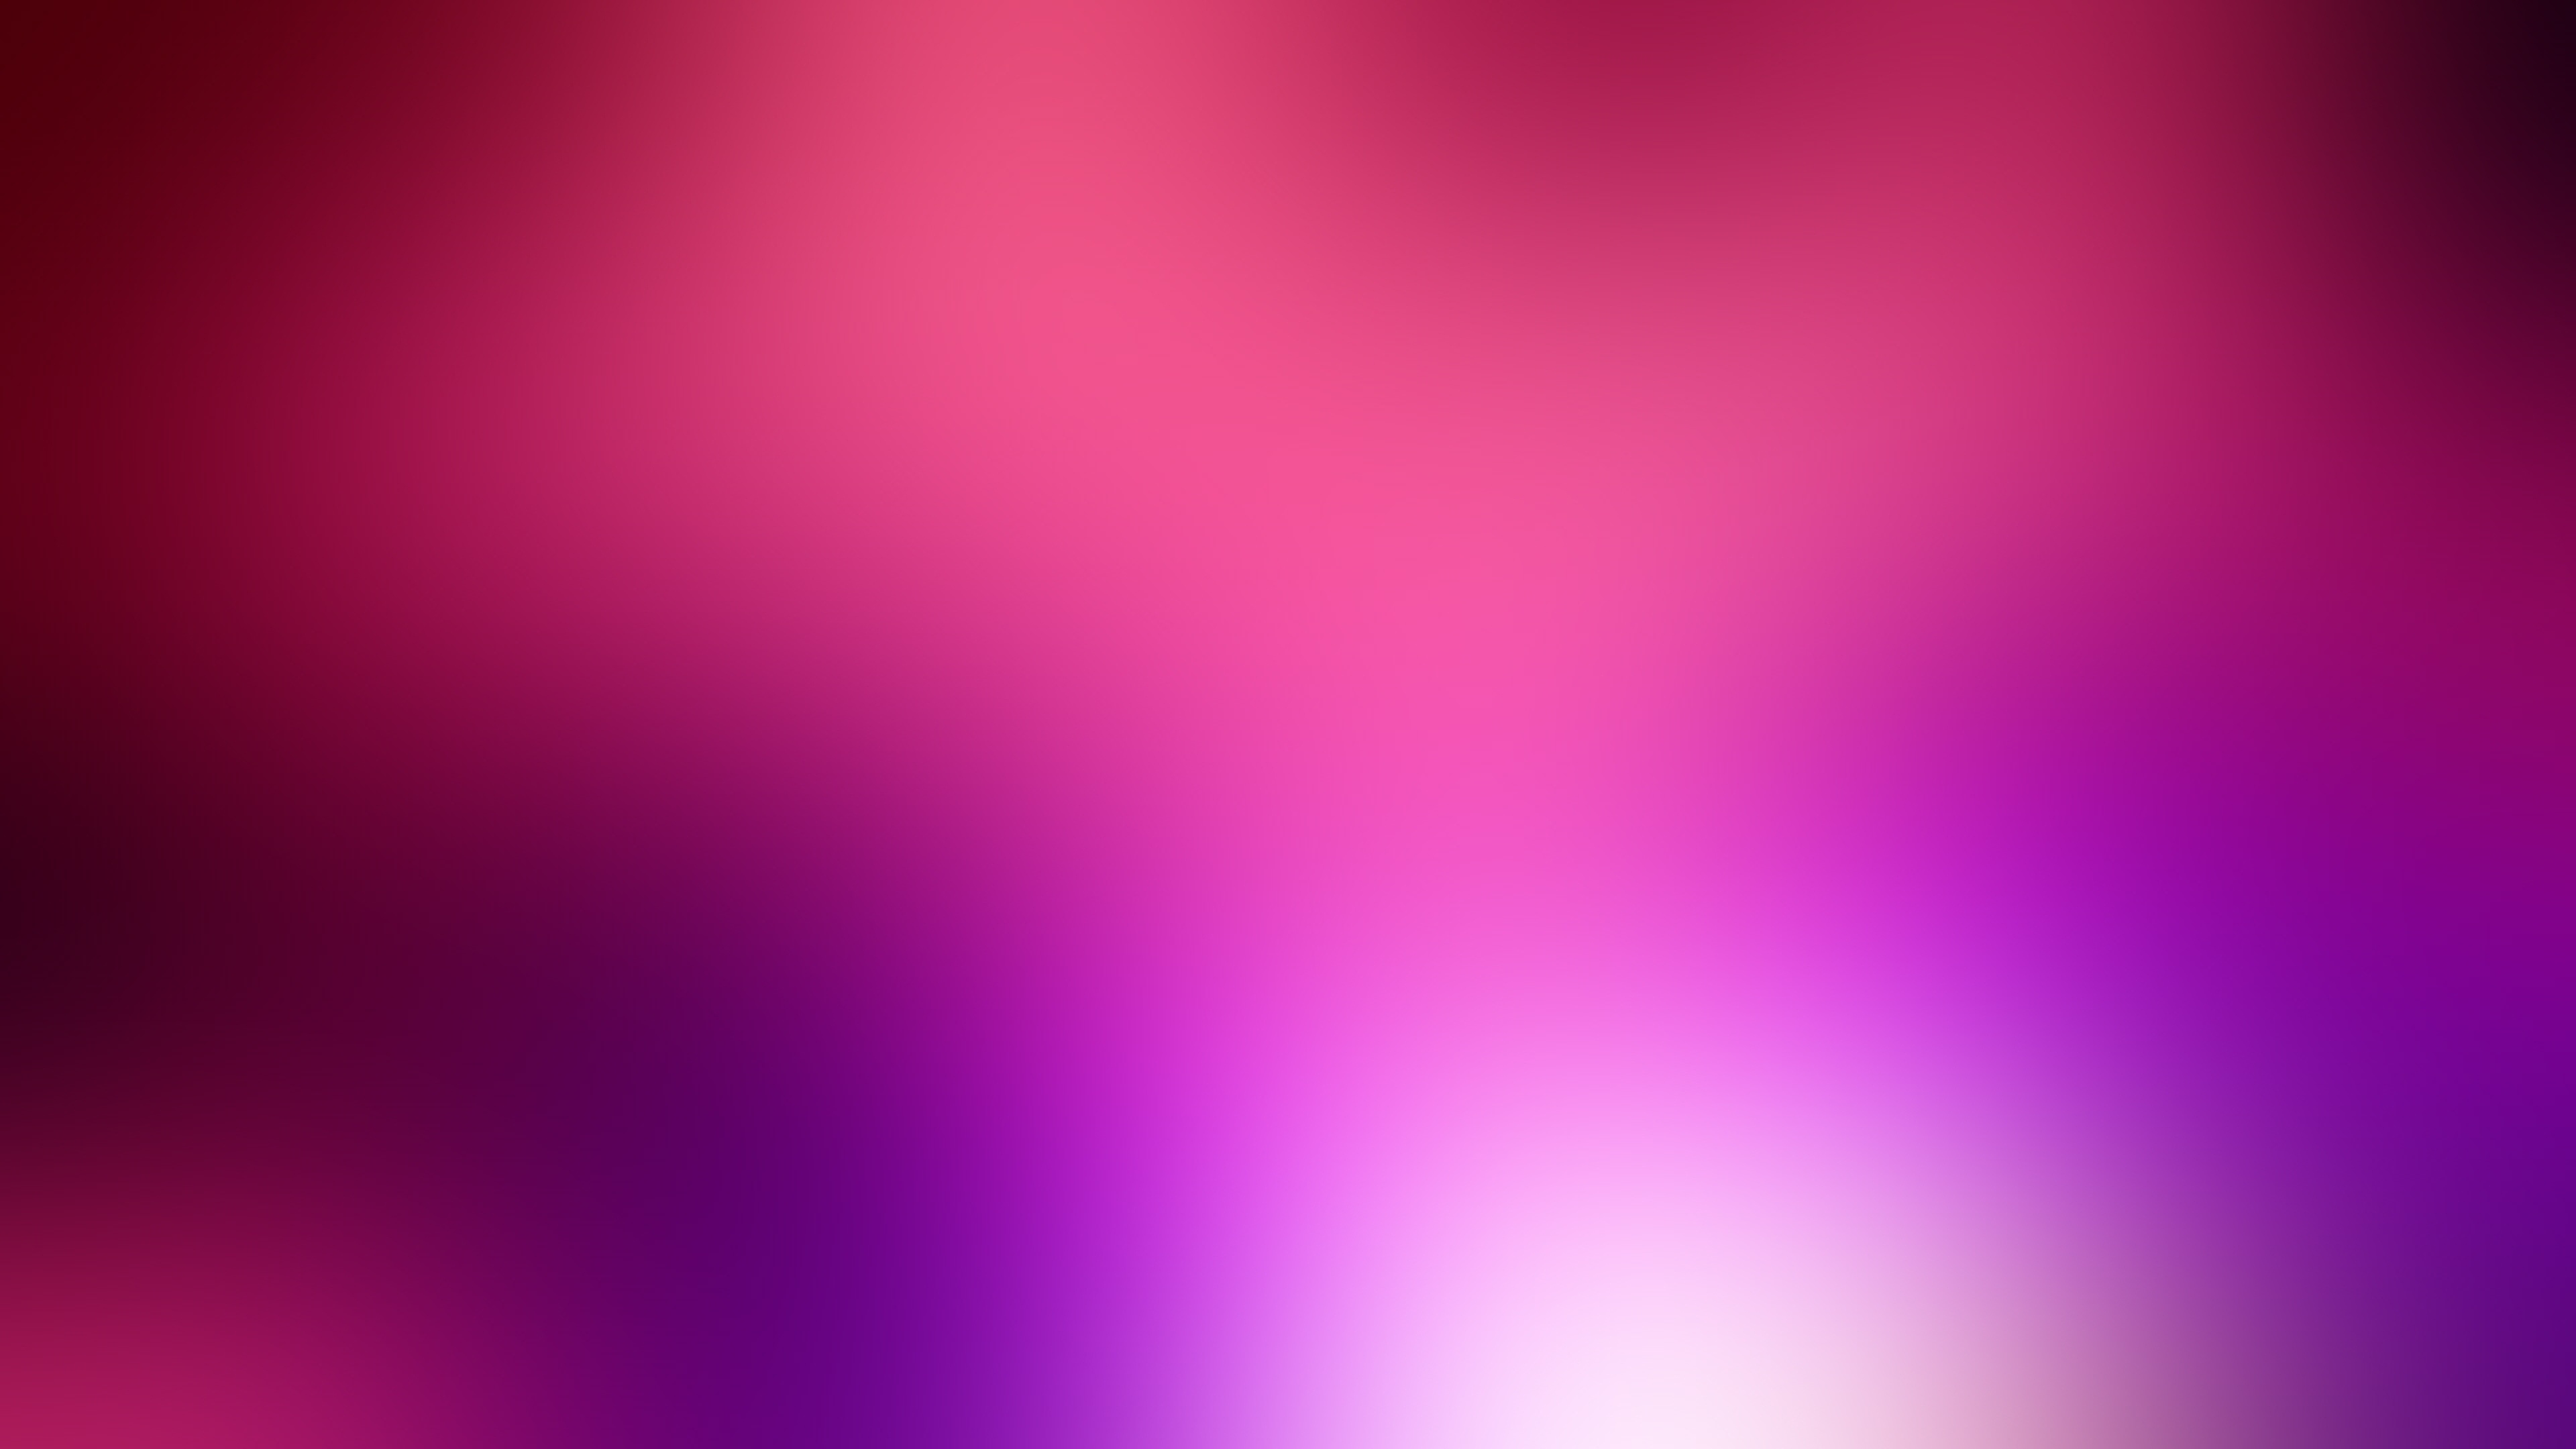 Cool Purple And Pink Backgrounds - 3840x2160 Wallpaper 